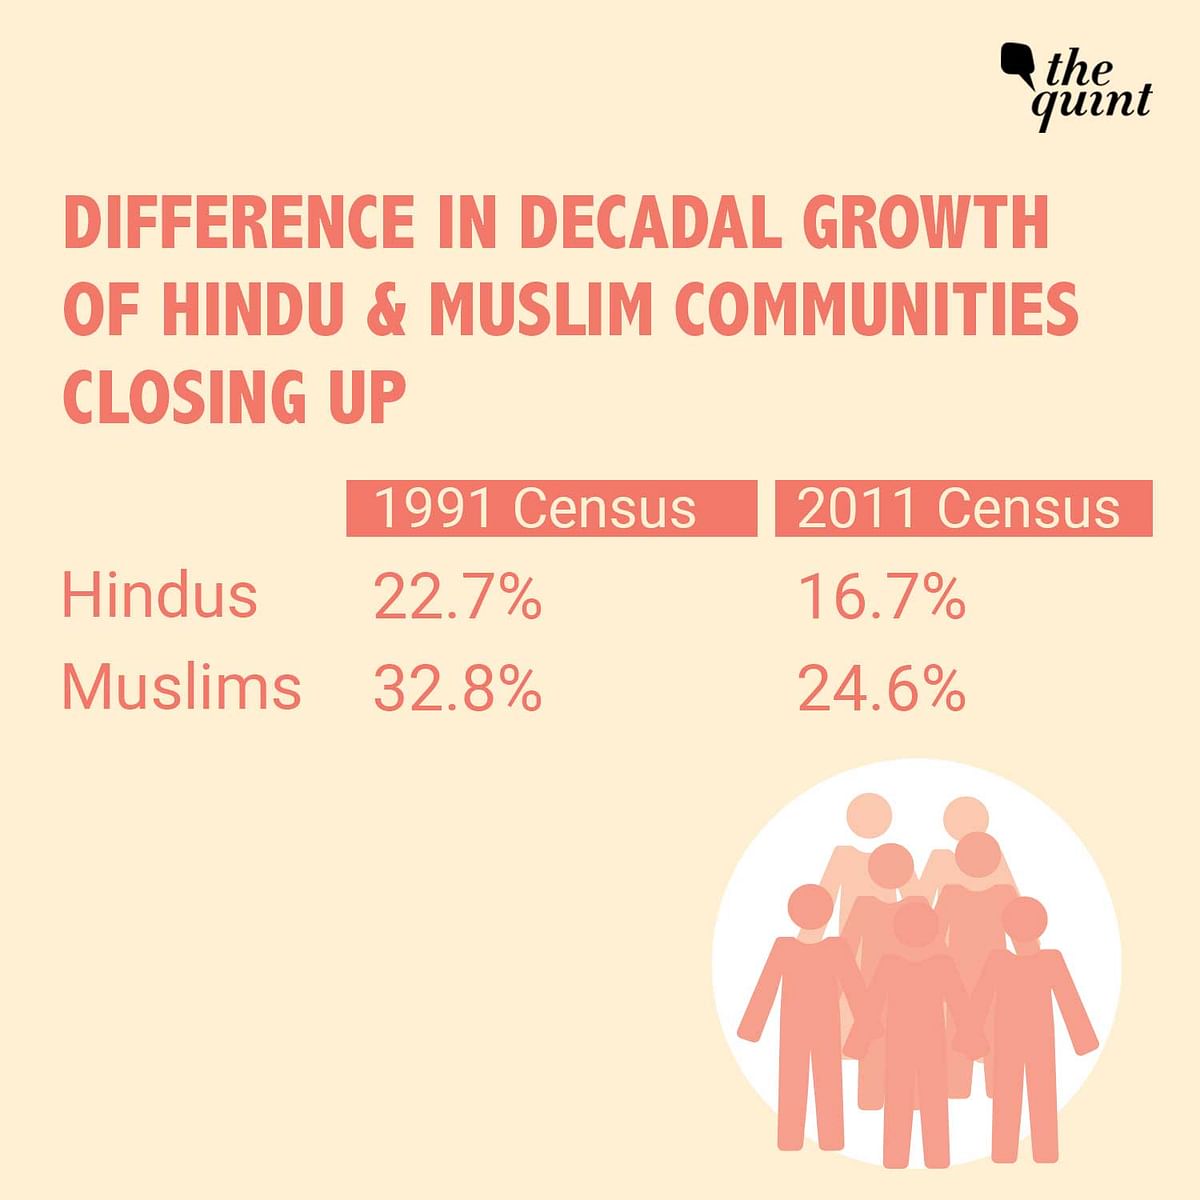 The Hindutva narrative has persistently attacked the Muslim population, claiming they are set to take over India.